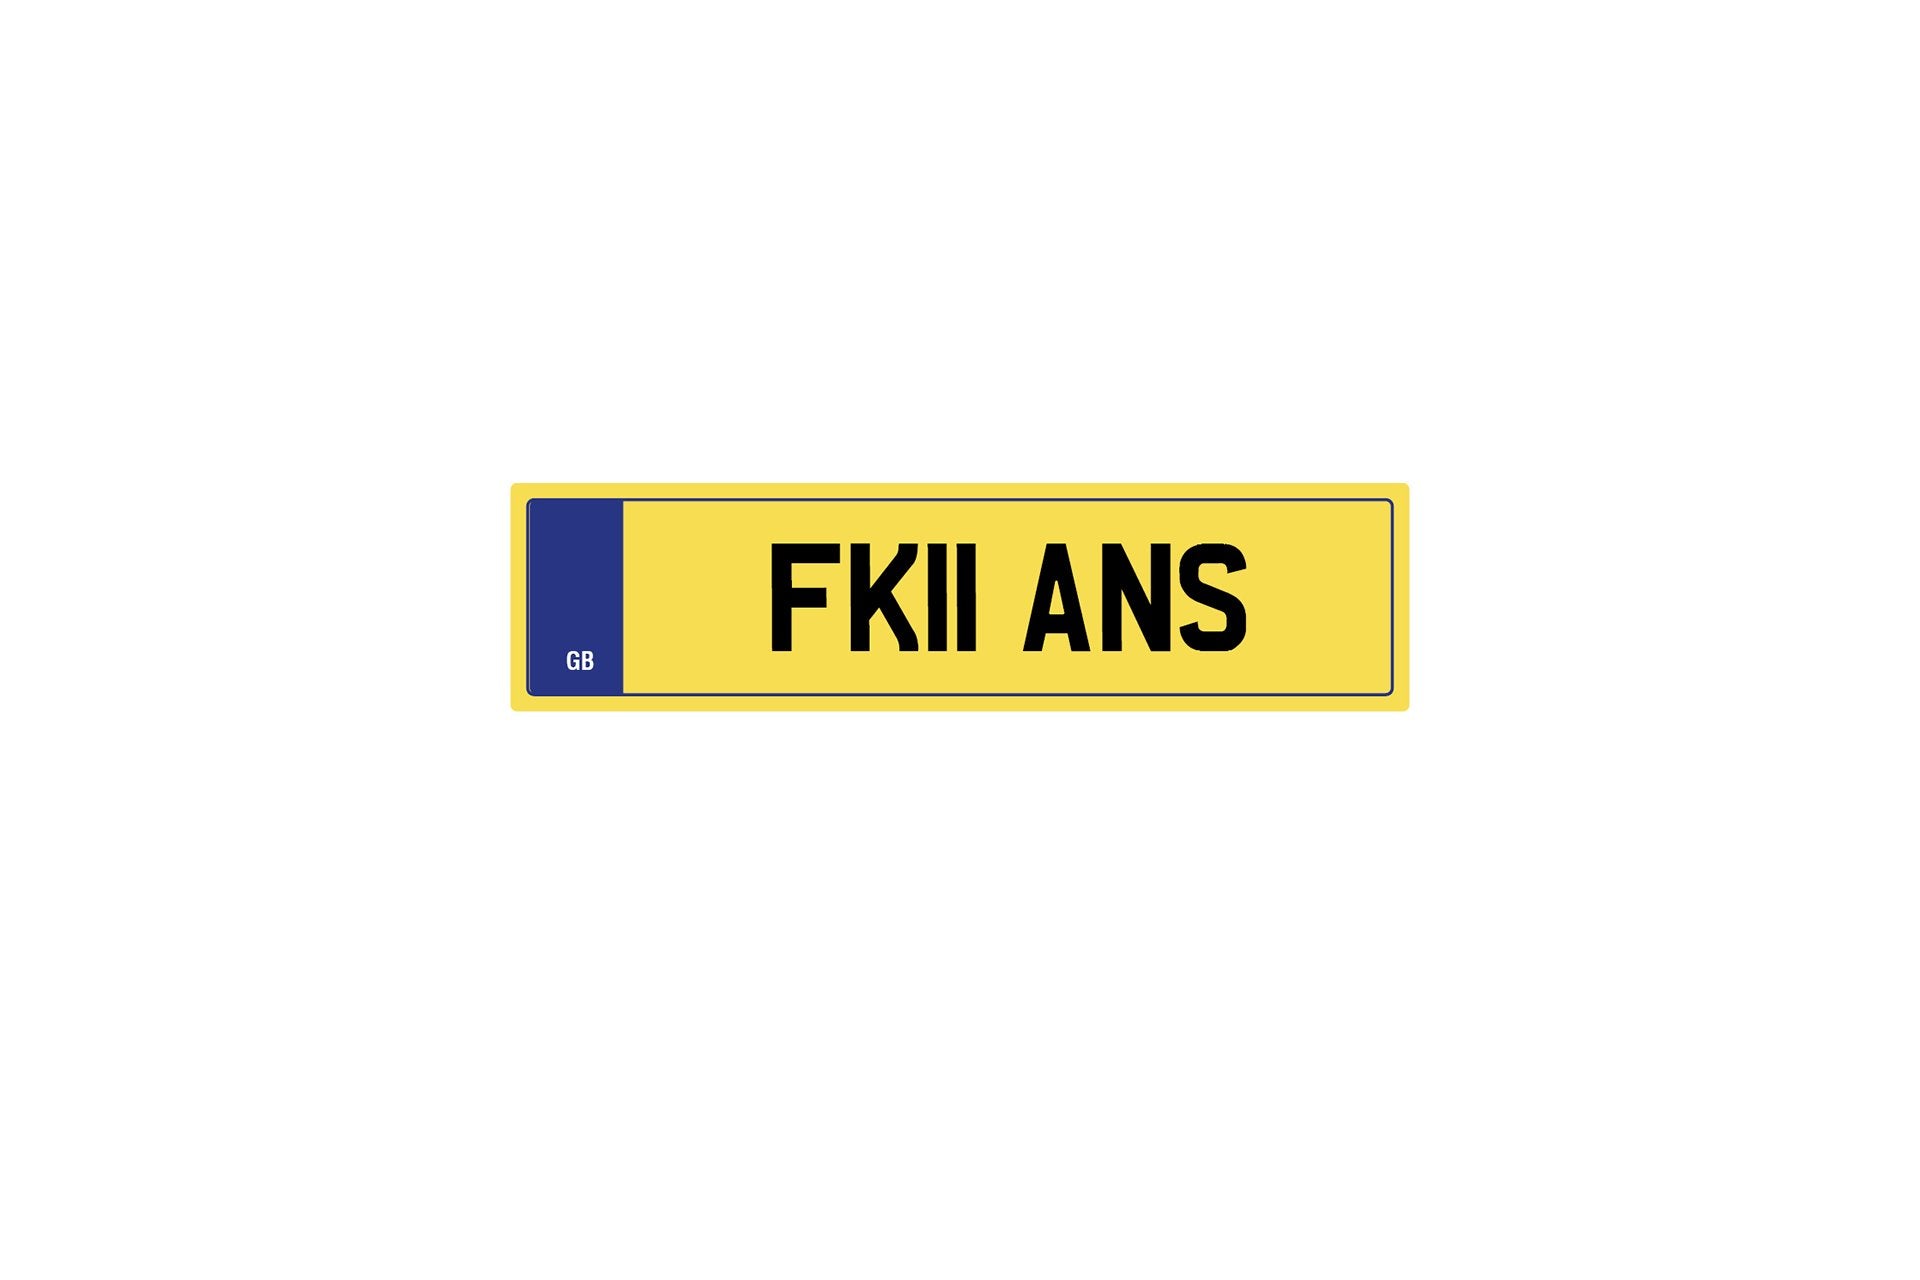 Private Plate Fk11 Ans by Kahn - Image 179